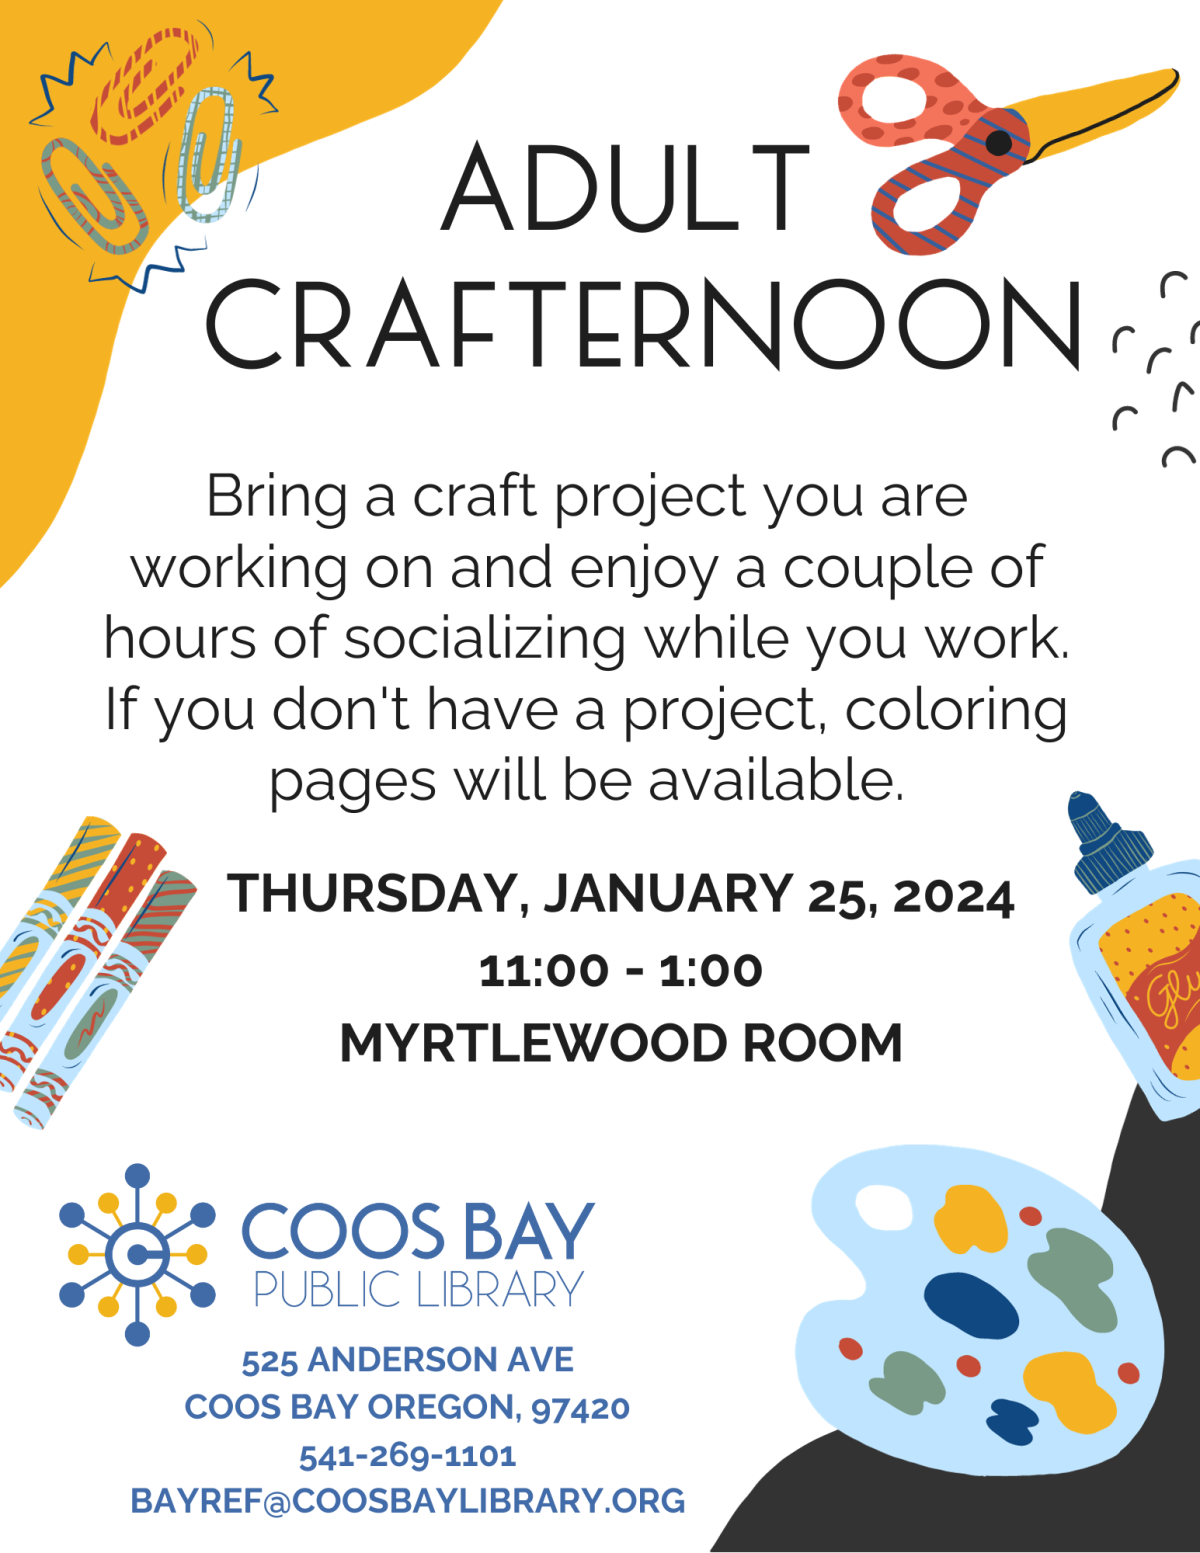 Adult Crafternoon Flyer with crafting supplies